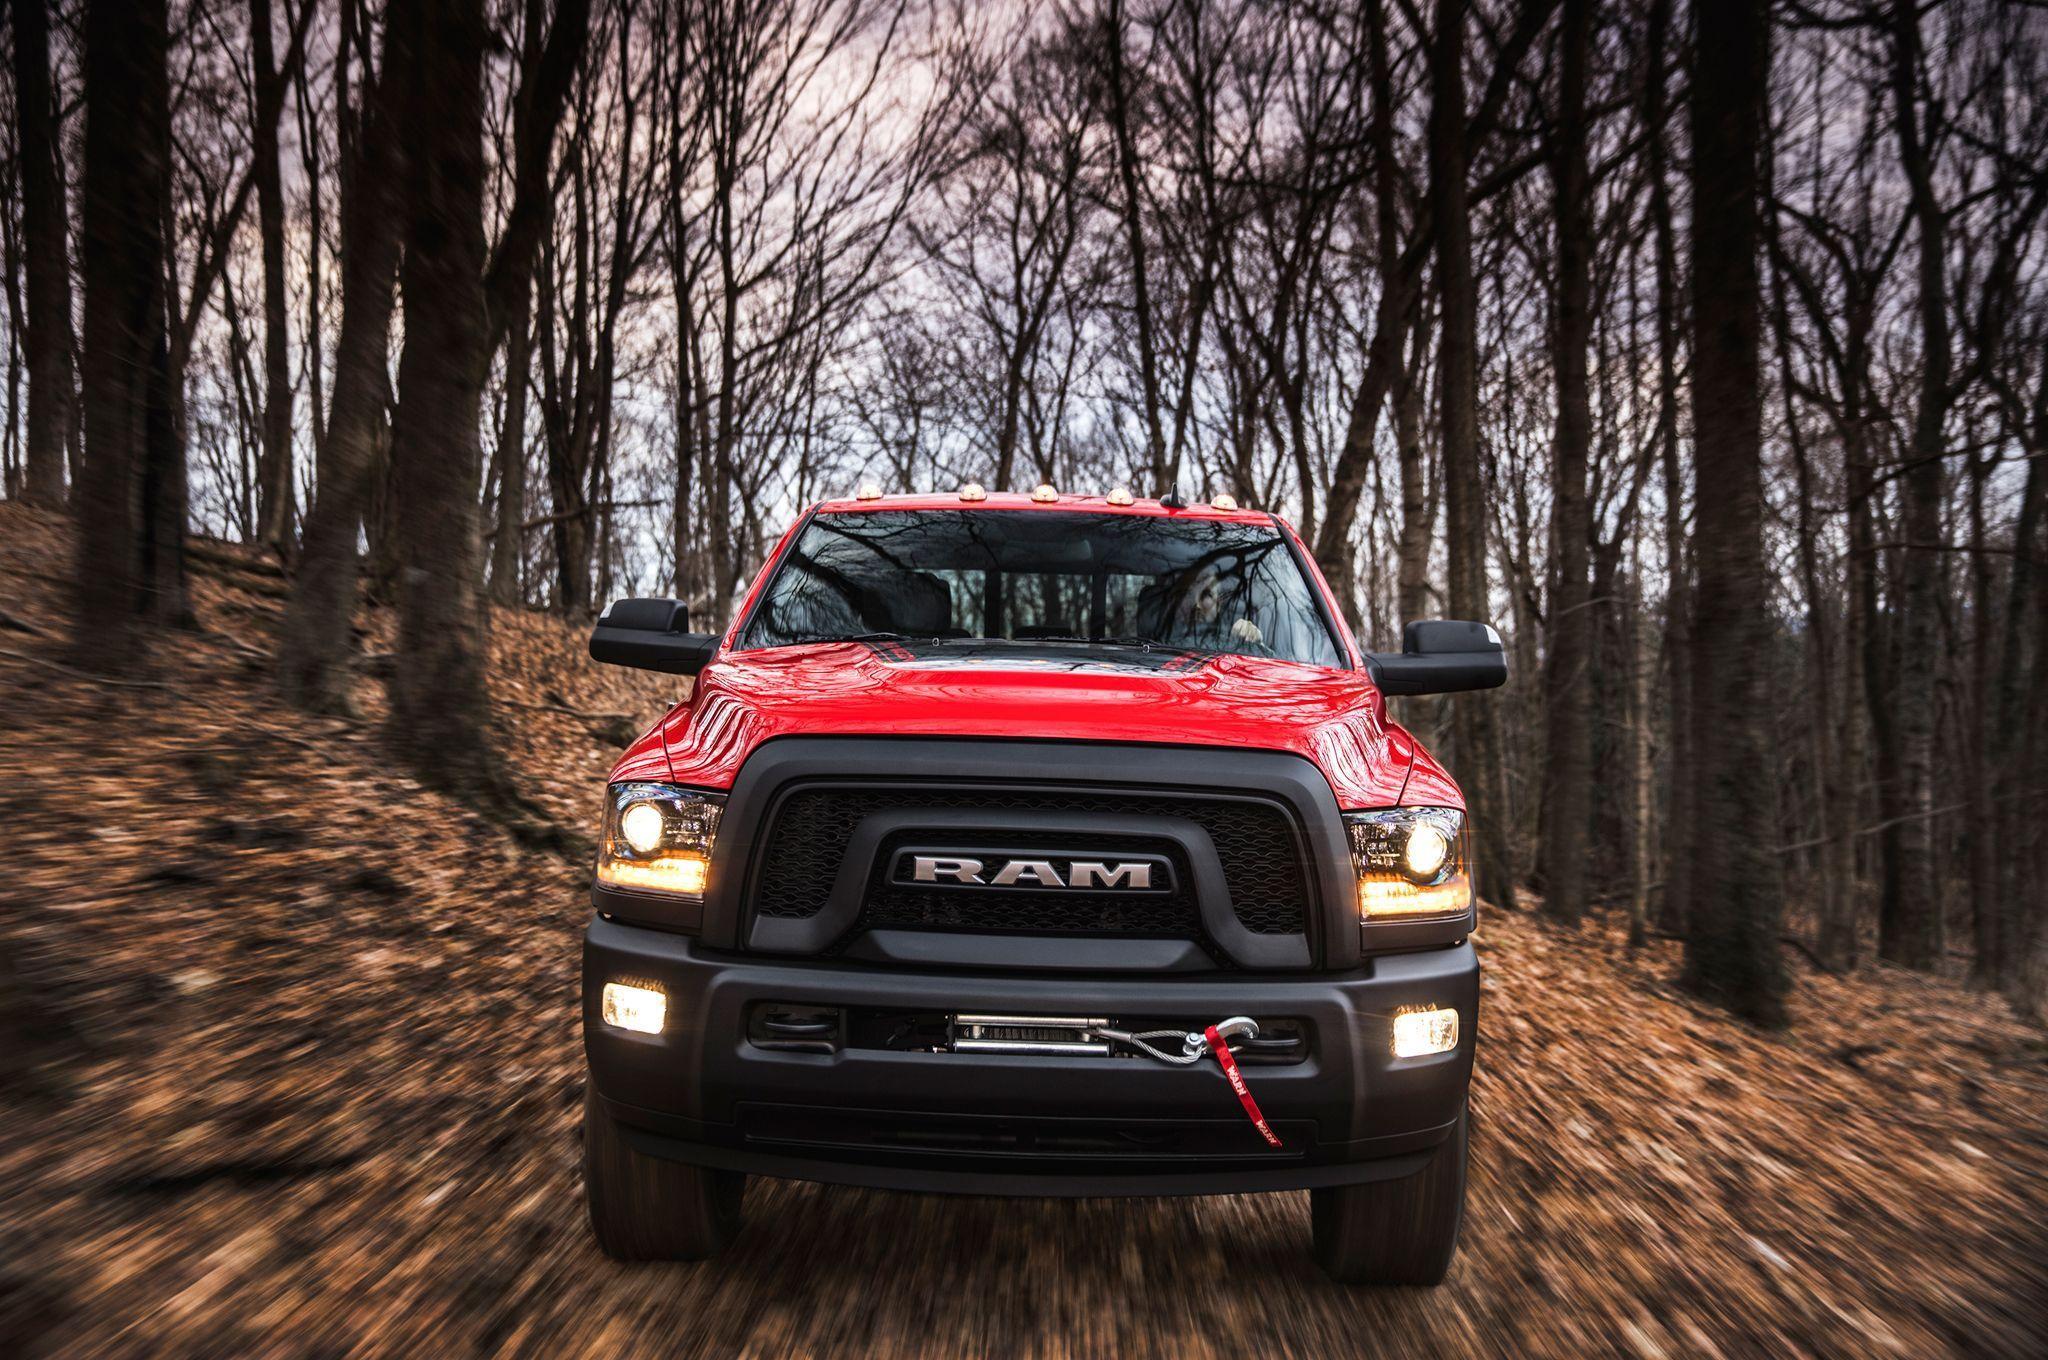 Putting the power in the Power Wagon